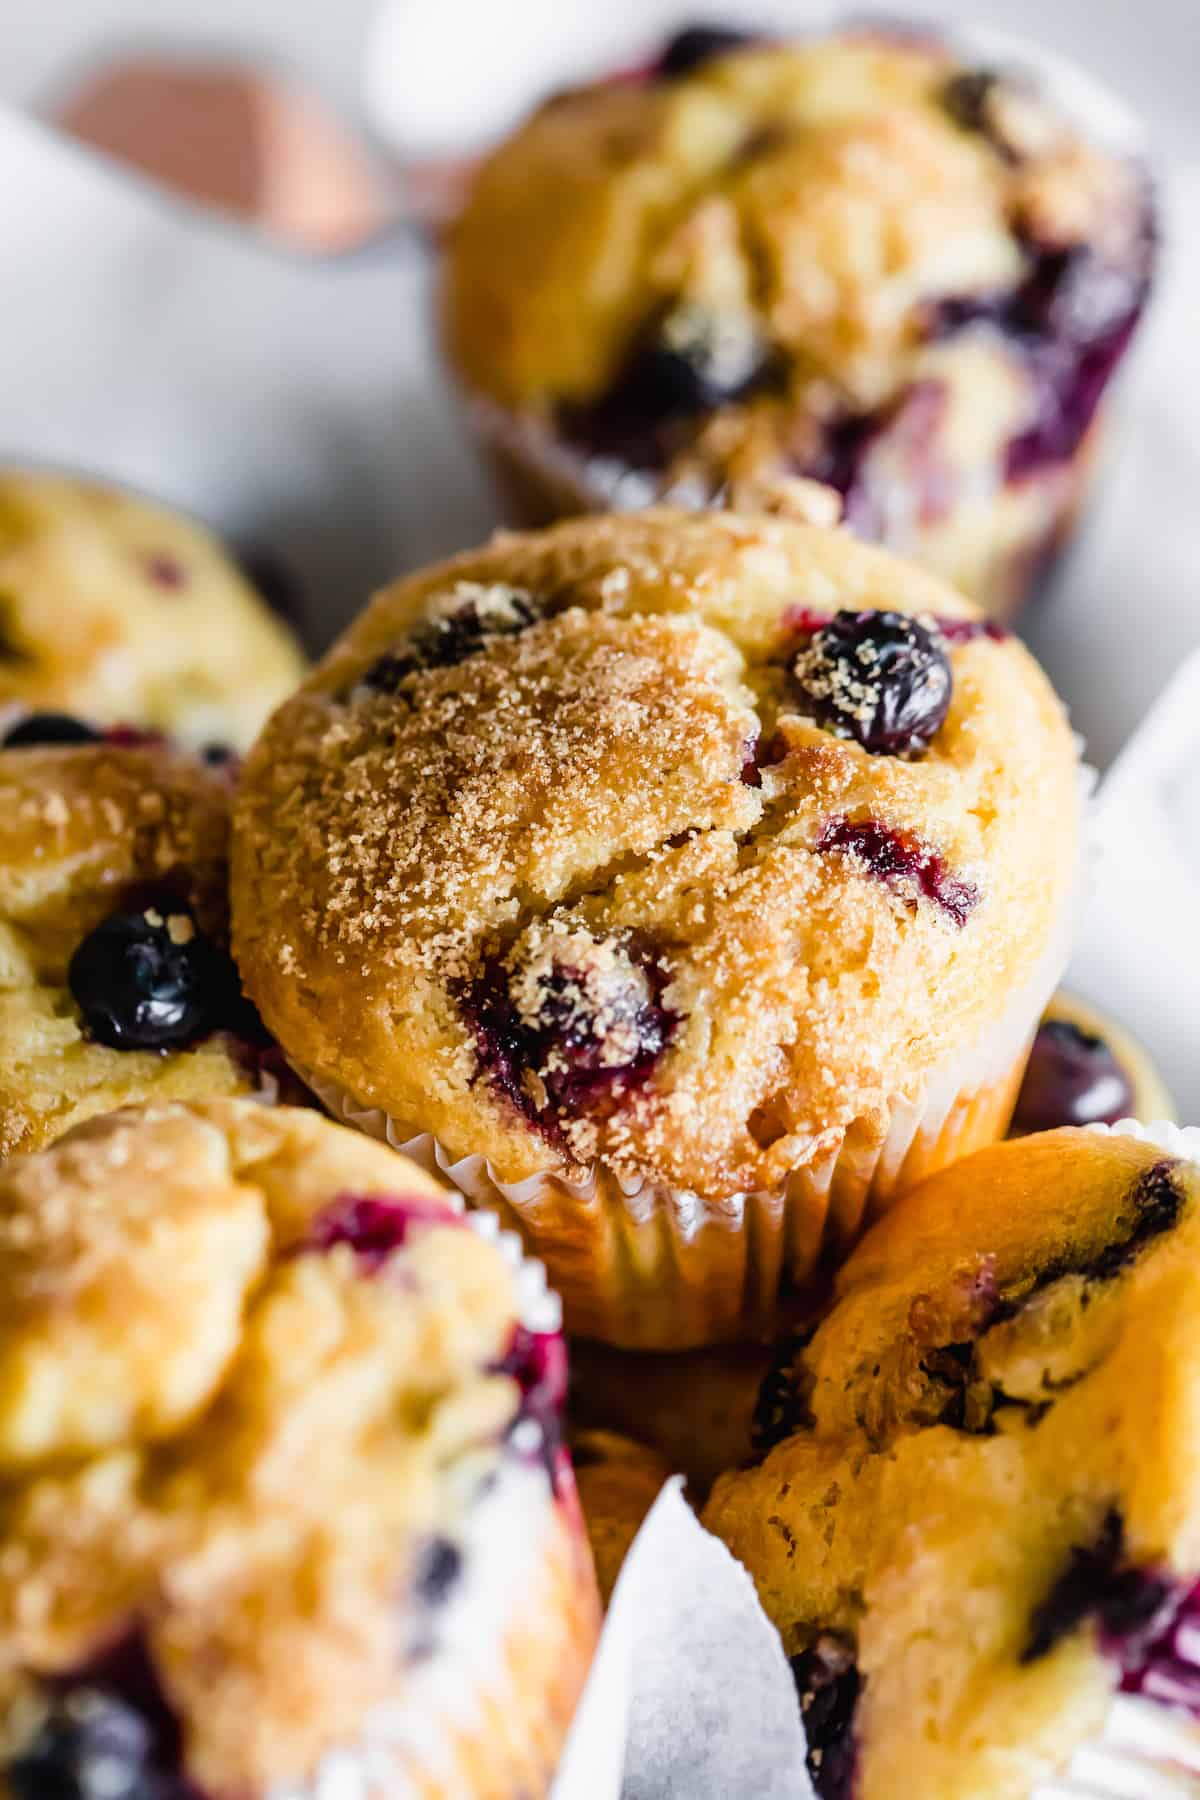 A Super Tight Shot of a Gluten-Free Blueberry Muffin with a Light Brown Sugar Topping